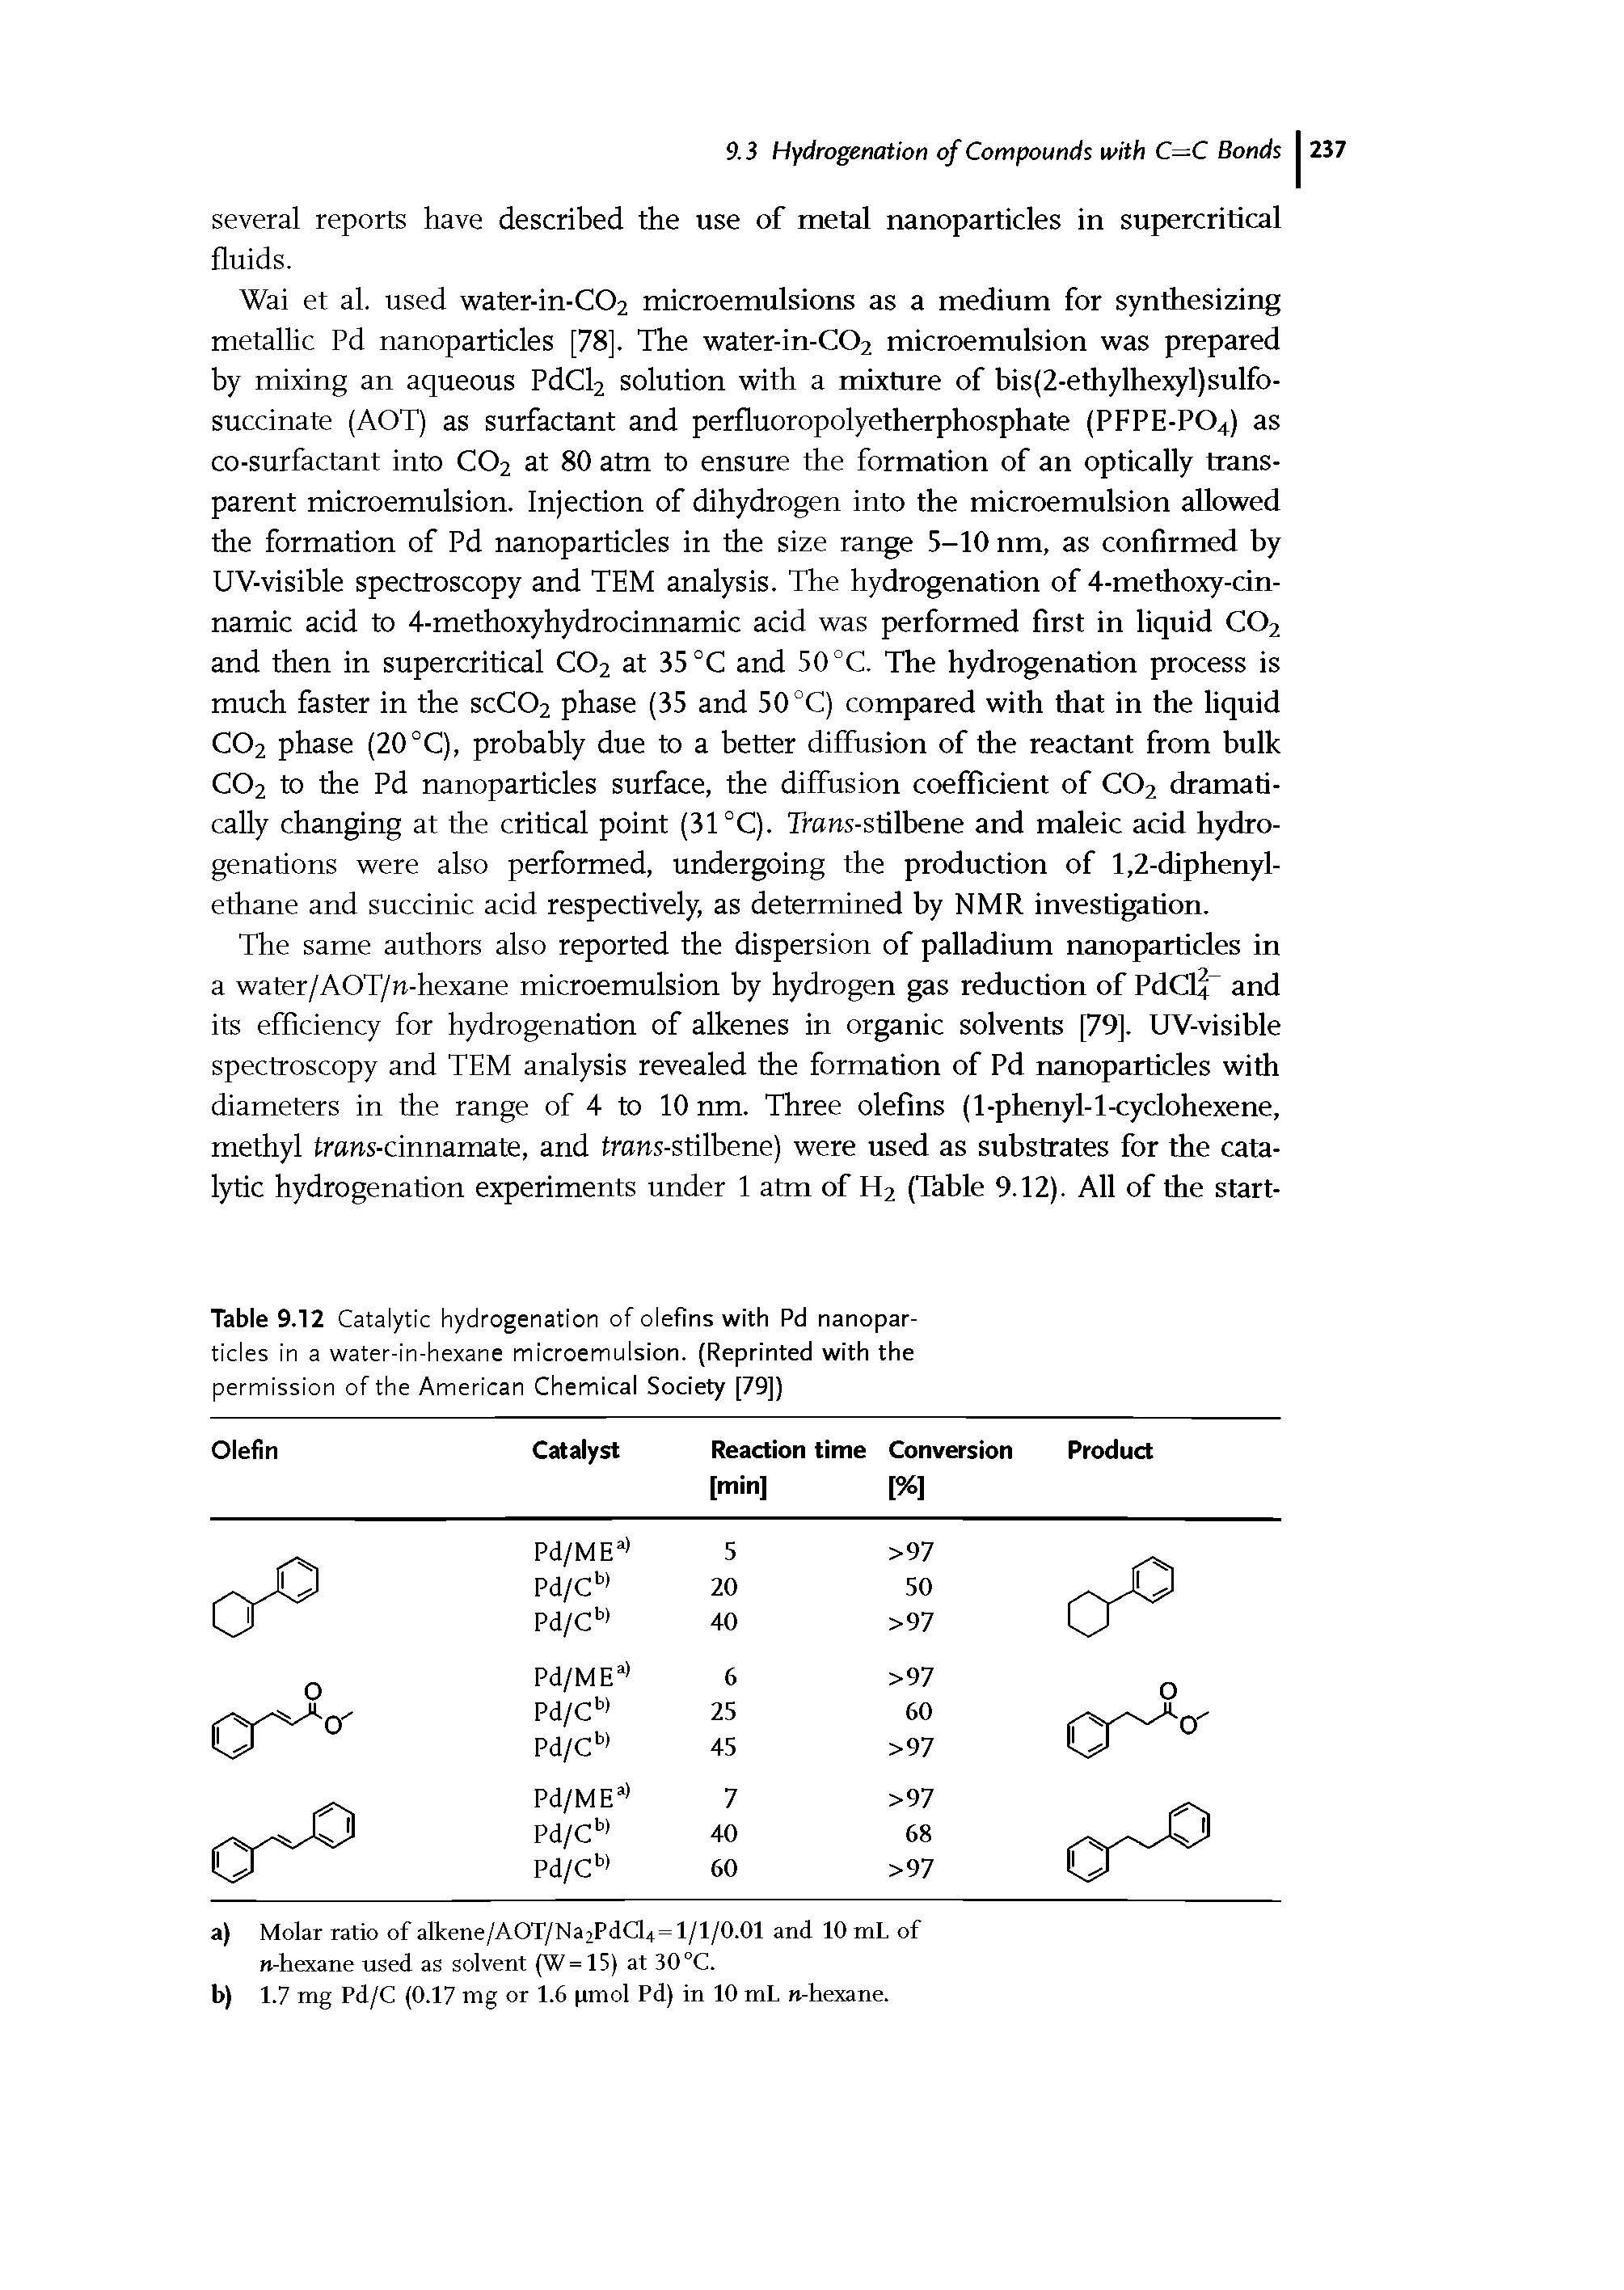 Table 9.12 Catalytic hydrogenation of olefins with Pd nanoparticles in a water-in-hexane microemulsion. (Reprinted with the permission of the American Chemical Society [79])...